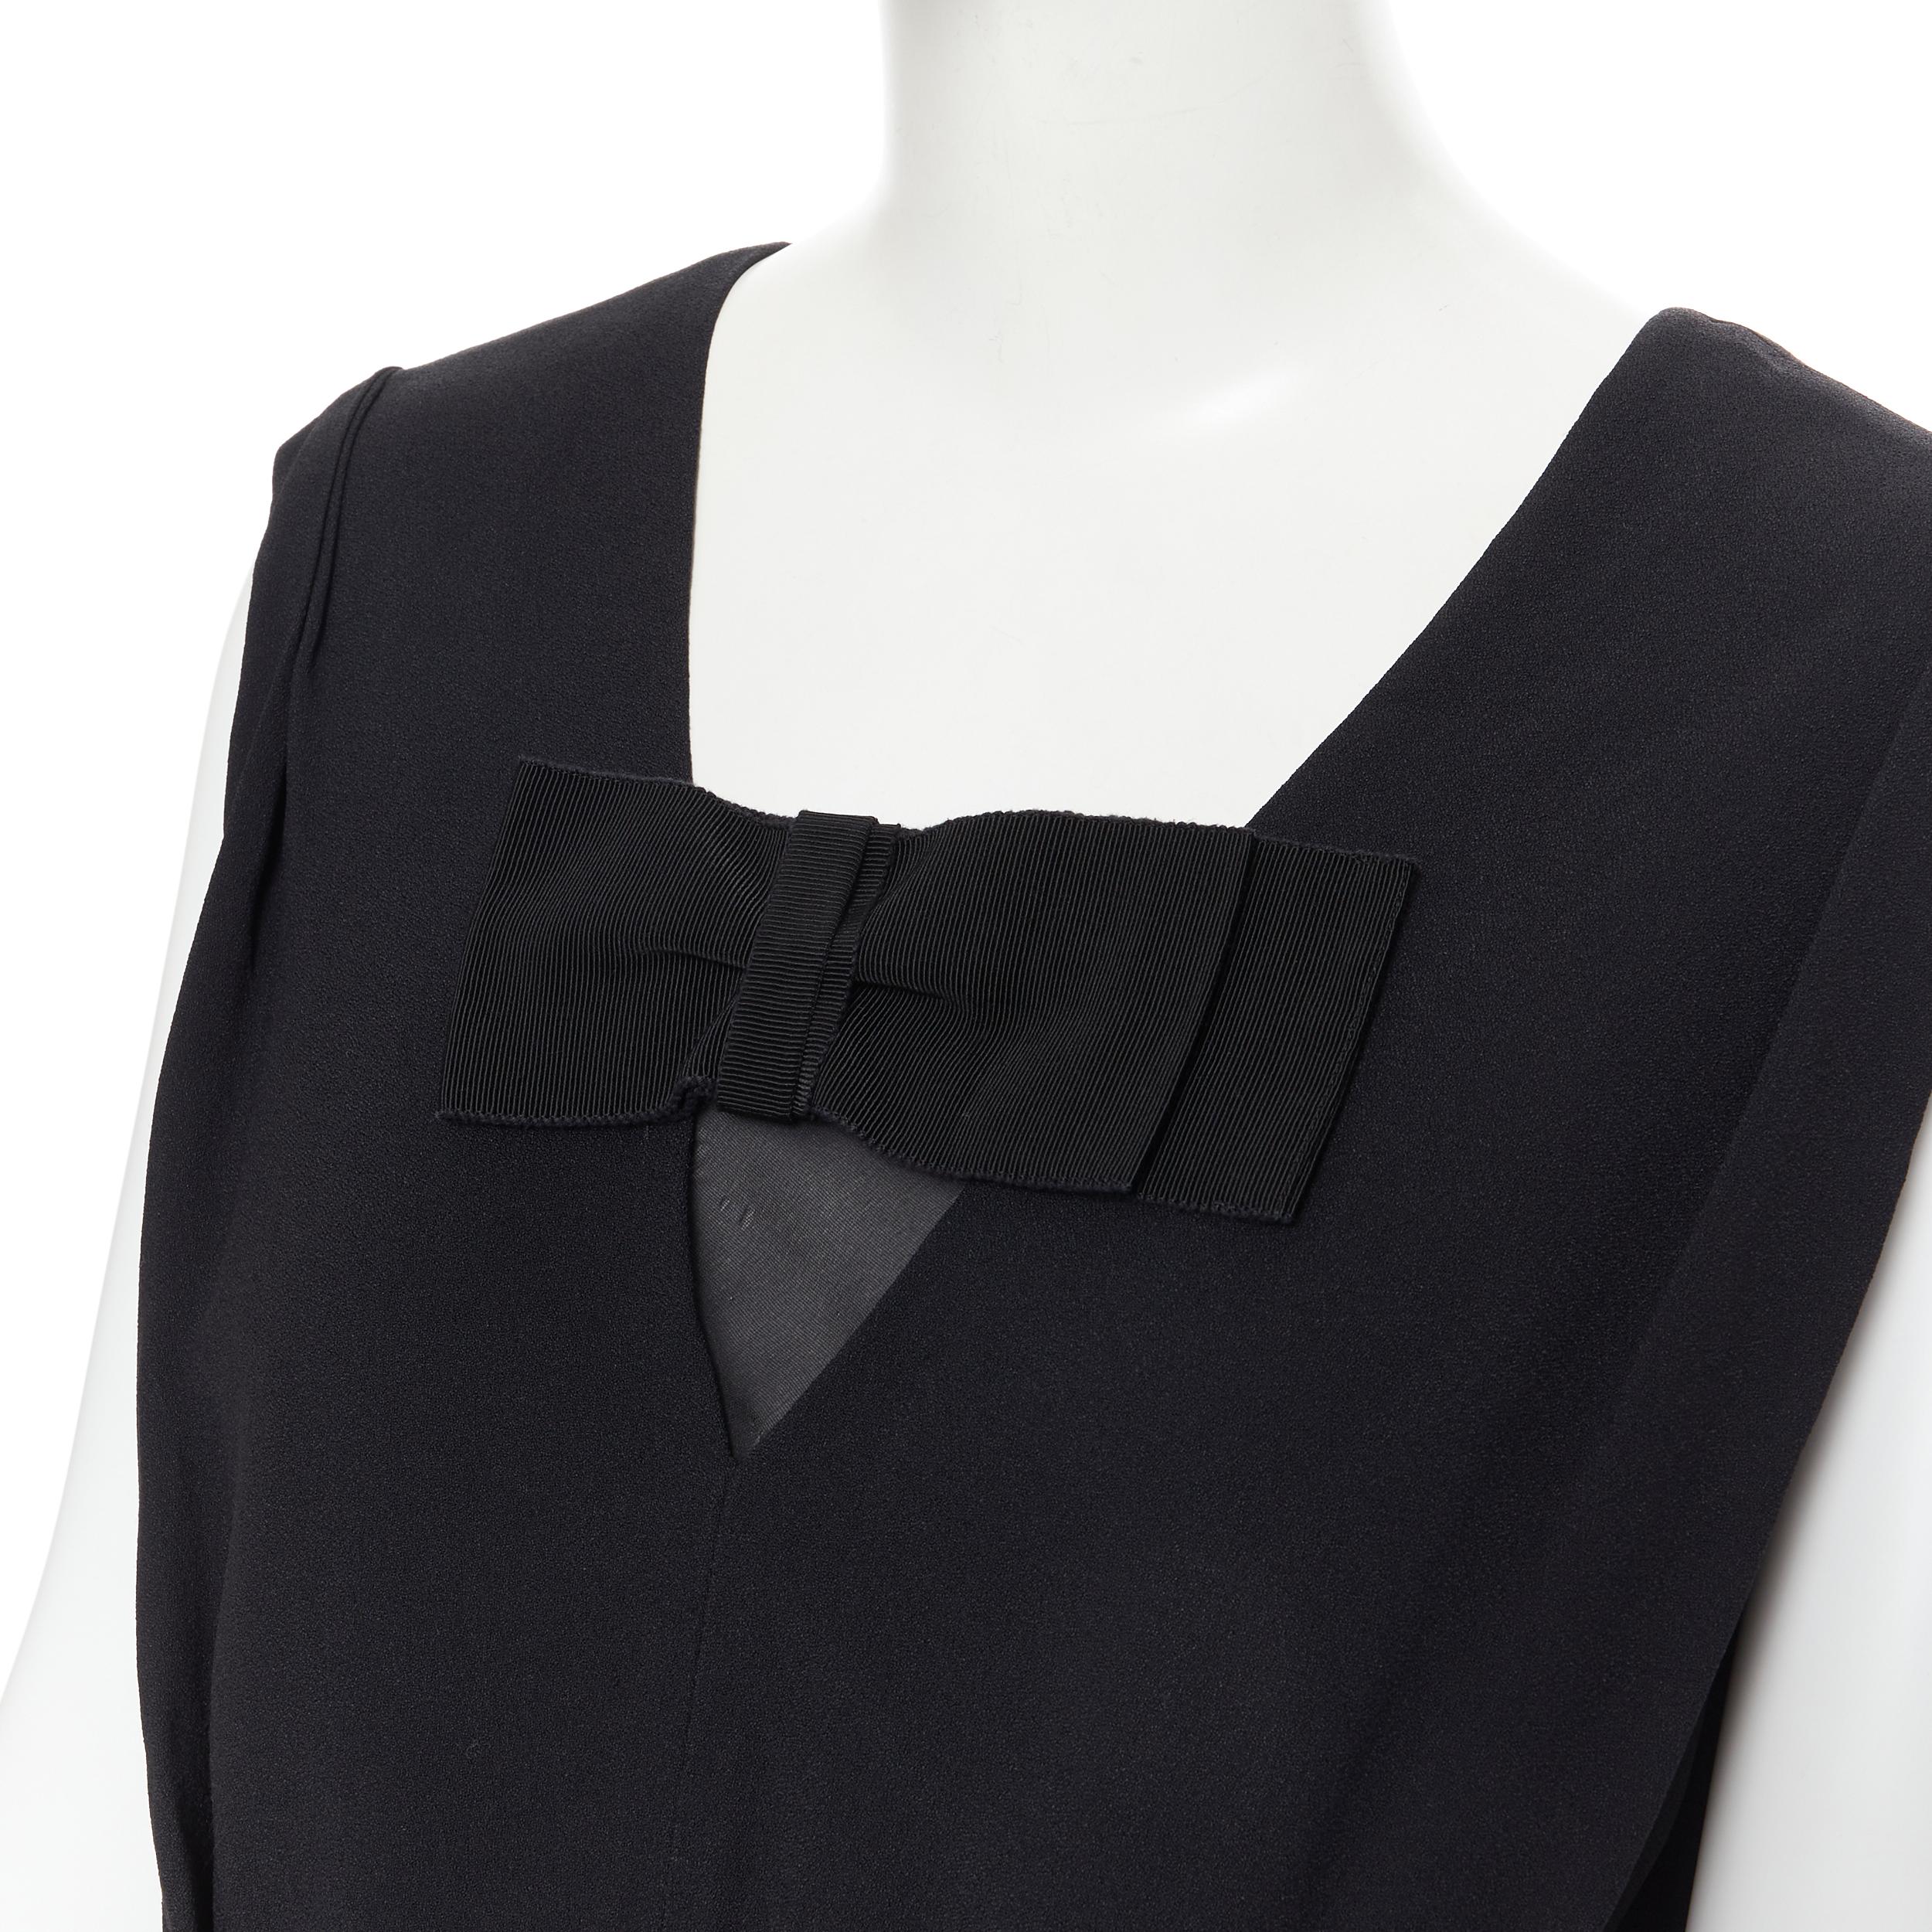 PRADA black oversized grosgrain bow pleated front sheath dress IT42 M 
Reference: PYCN/A00072 
Brand: Prada 
Designer: Miuccia Prada 
Material: Acetate 
Color: Black 
Pattern: Solid 
Closure: Zip 
Extra Detail: V-neck with grosgrain bow detail.